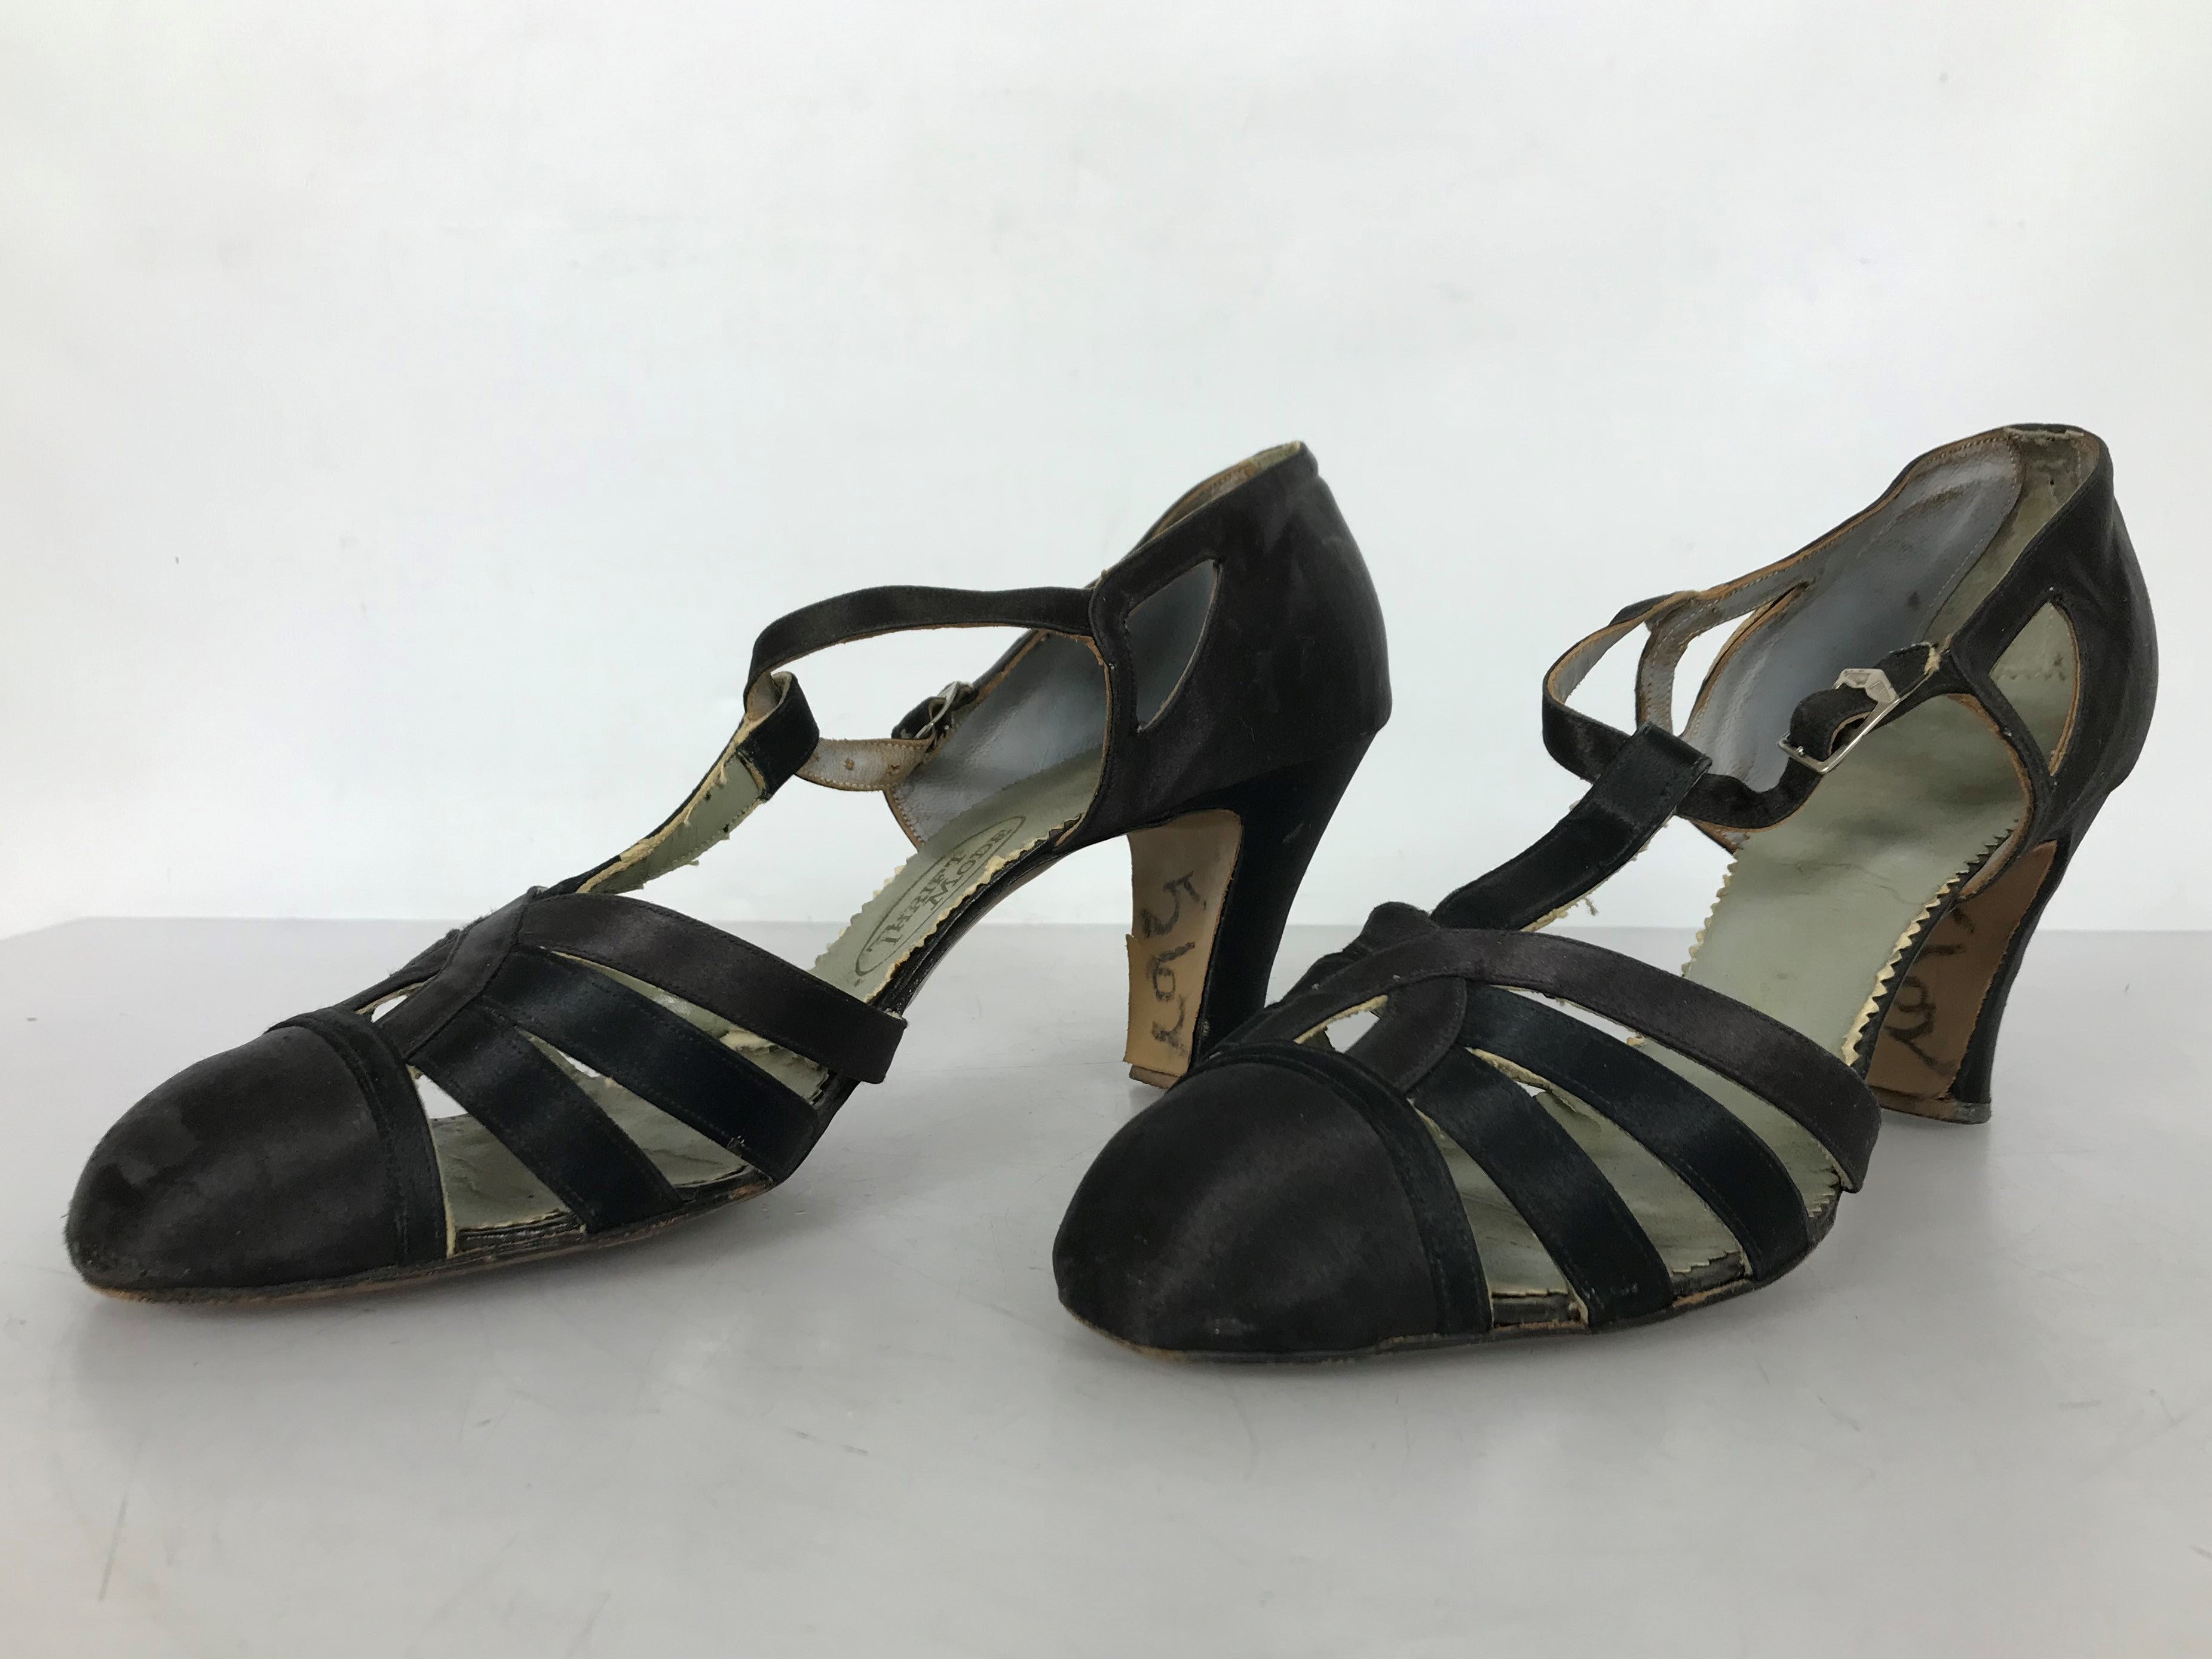 Vintage Thrift Mode Brand Women's Casual Shoes Size 9 B